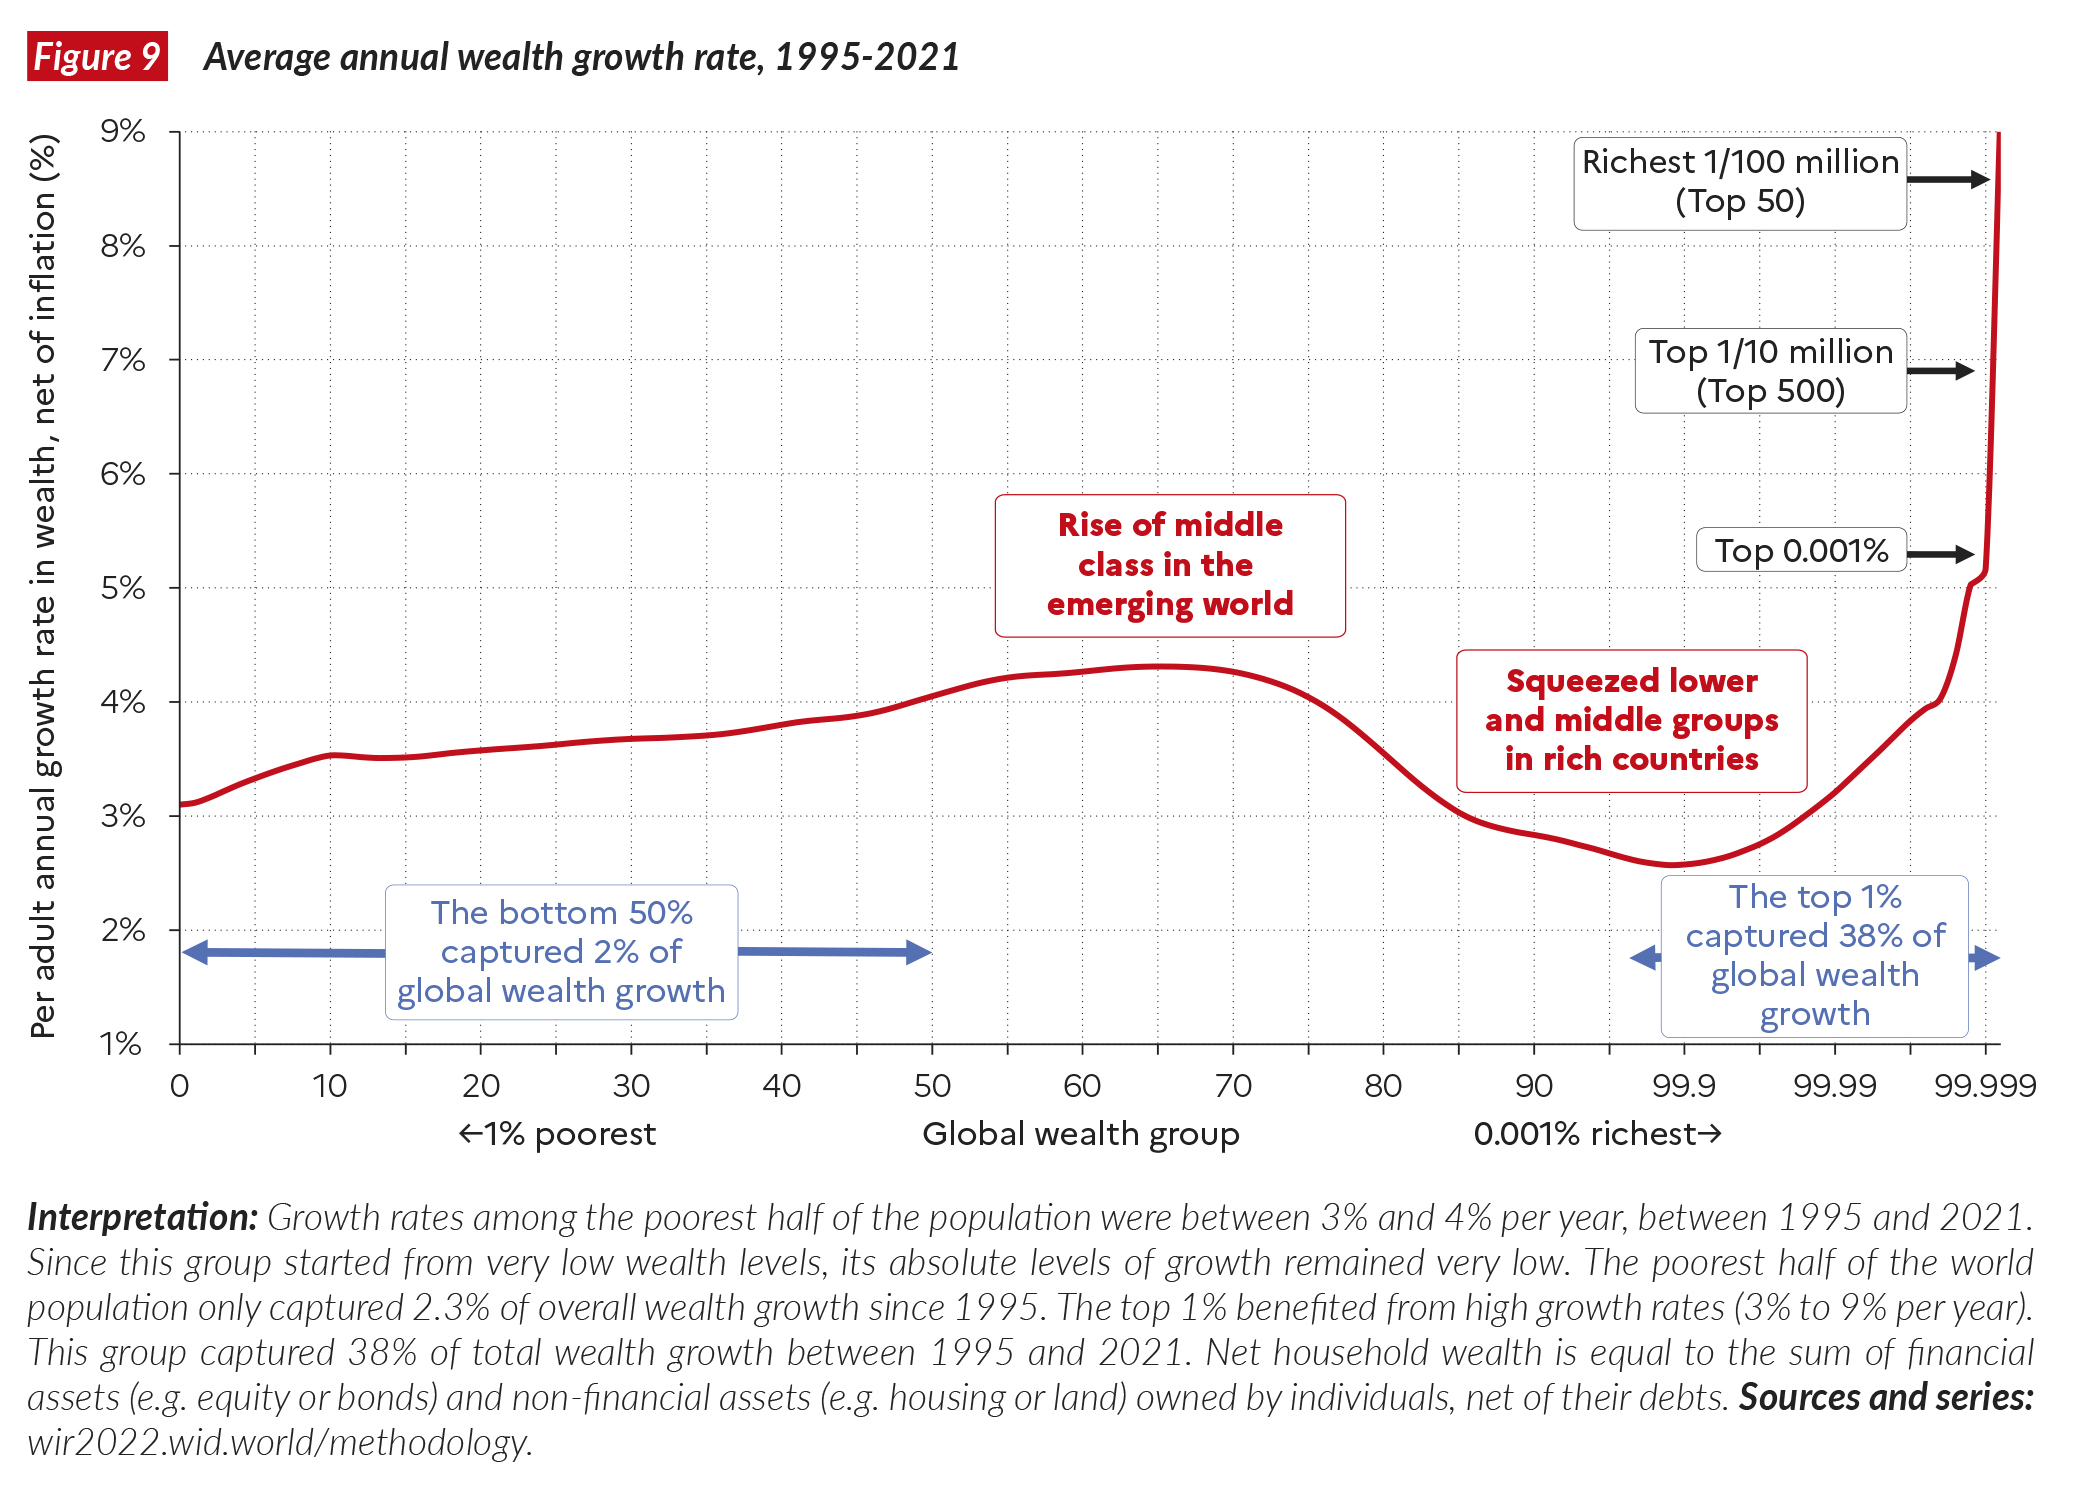 Average annual global wealth growth rate, 1995-2021. Graph: World Inequality Lab